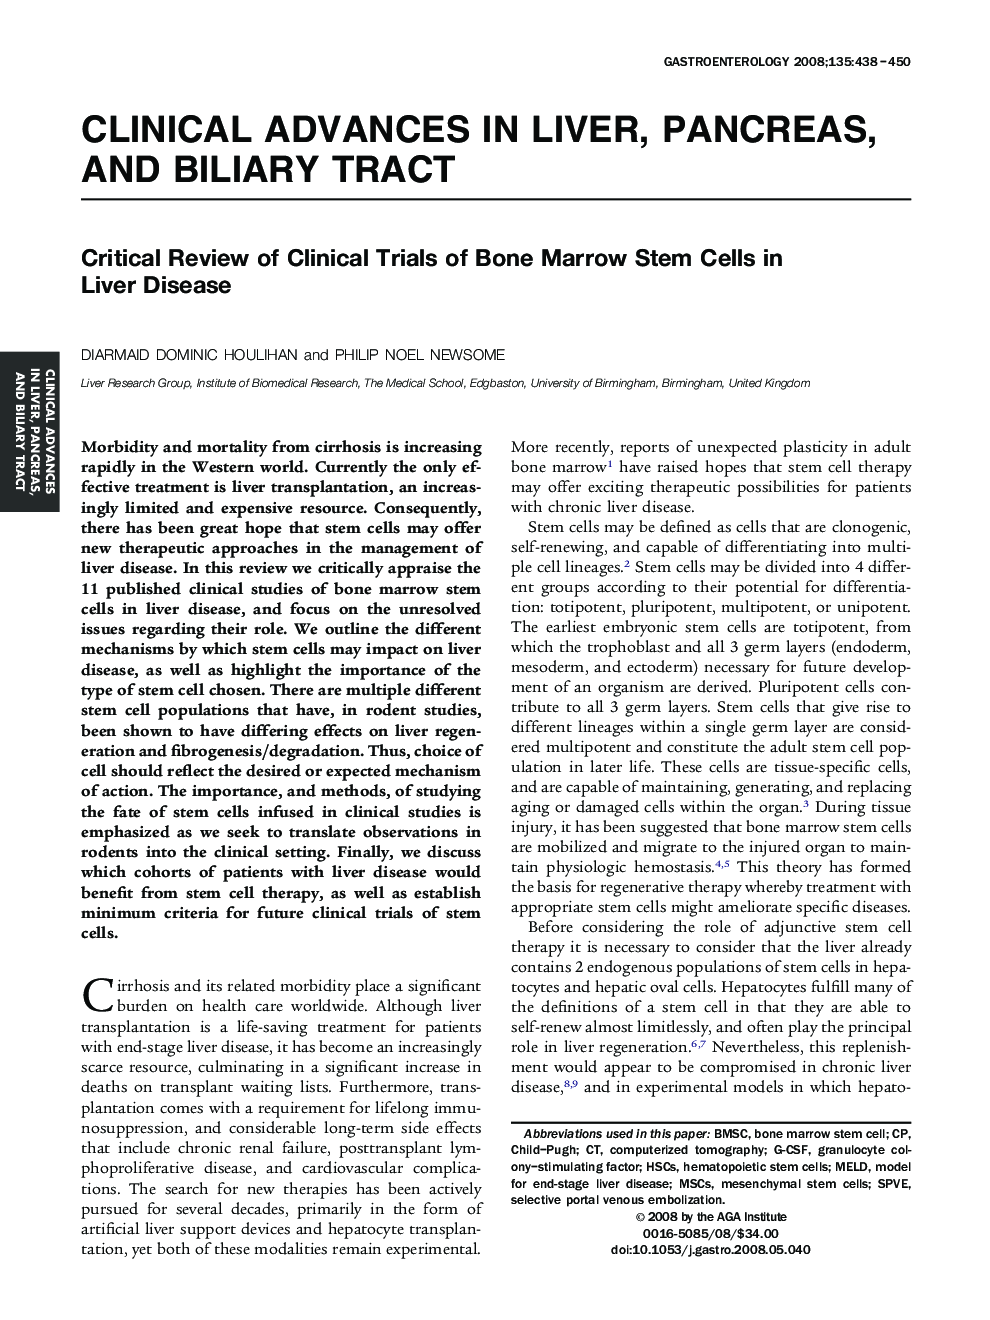 Critical Review of Clinical Trials of Bone Marrow Stem Cells in Liver Disease